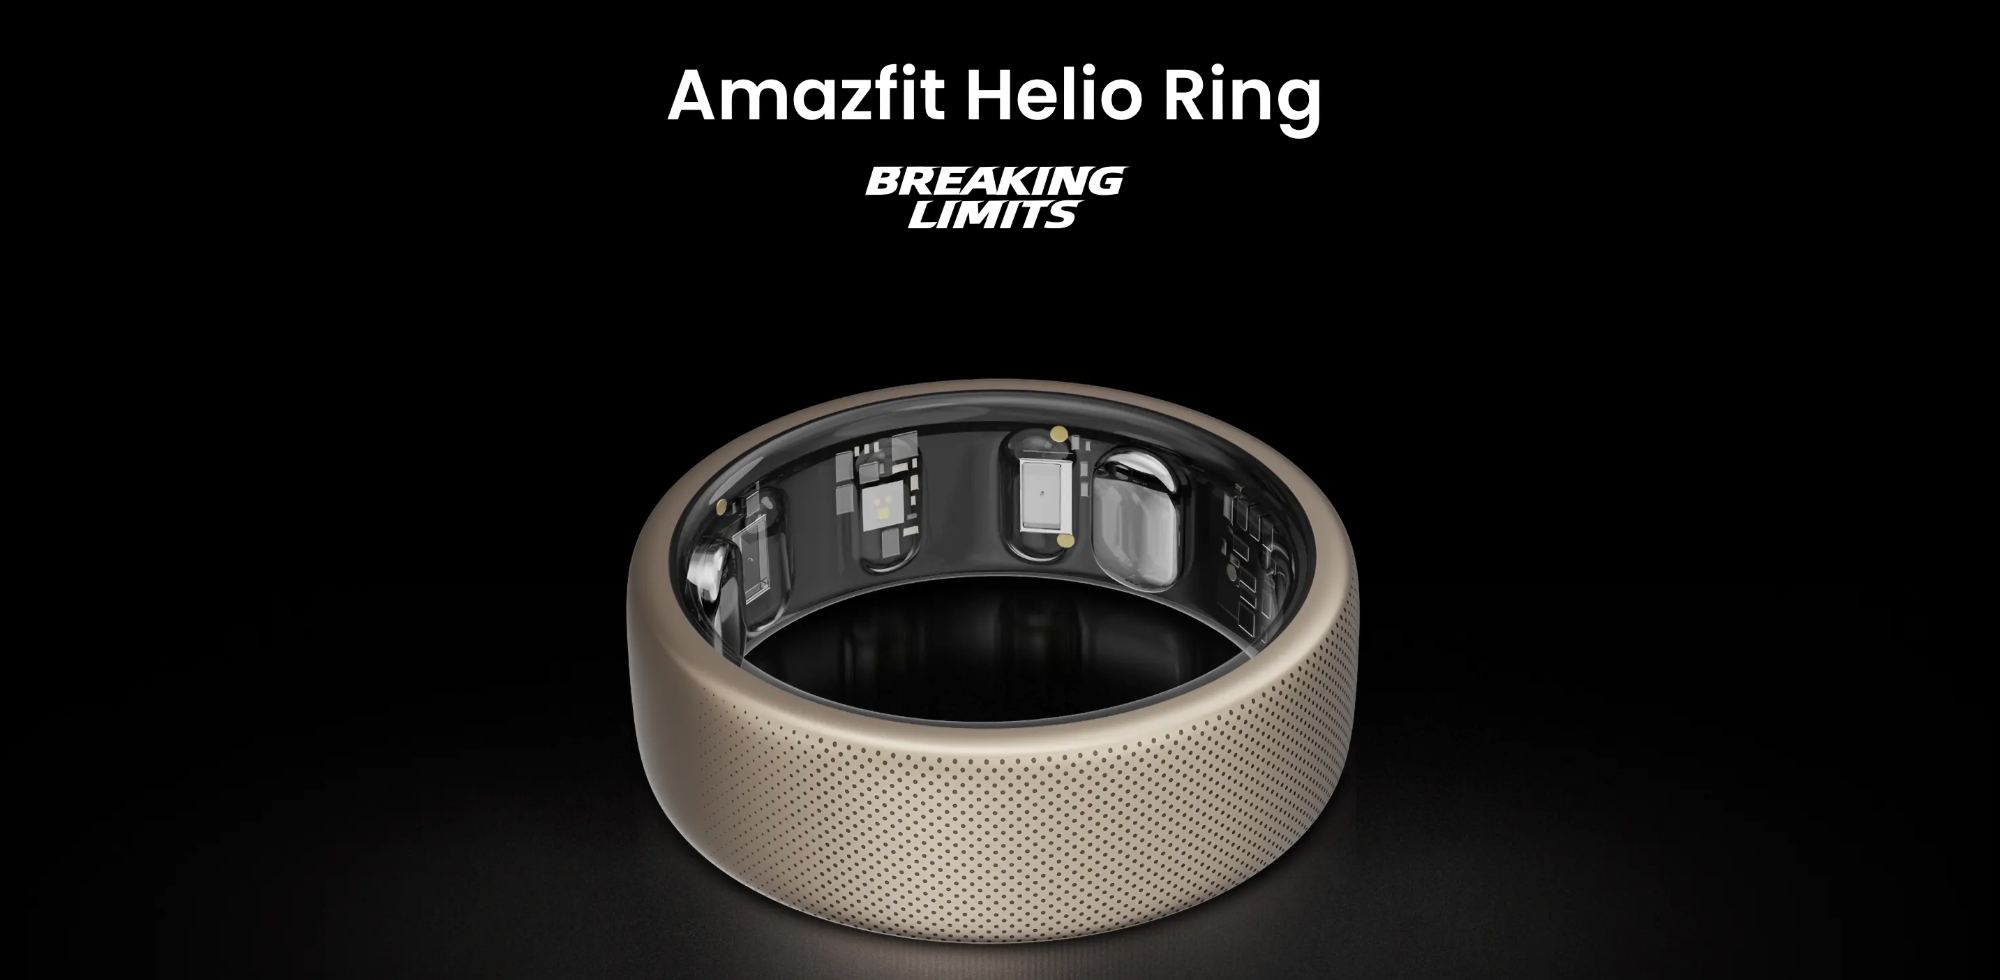 Amazfit Helio Ring: a titanium alloy smart ring that can measure heart rate and SpO2